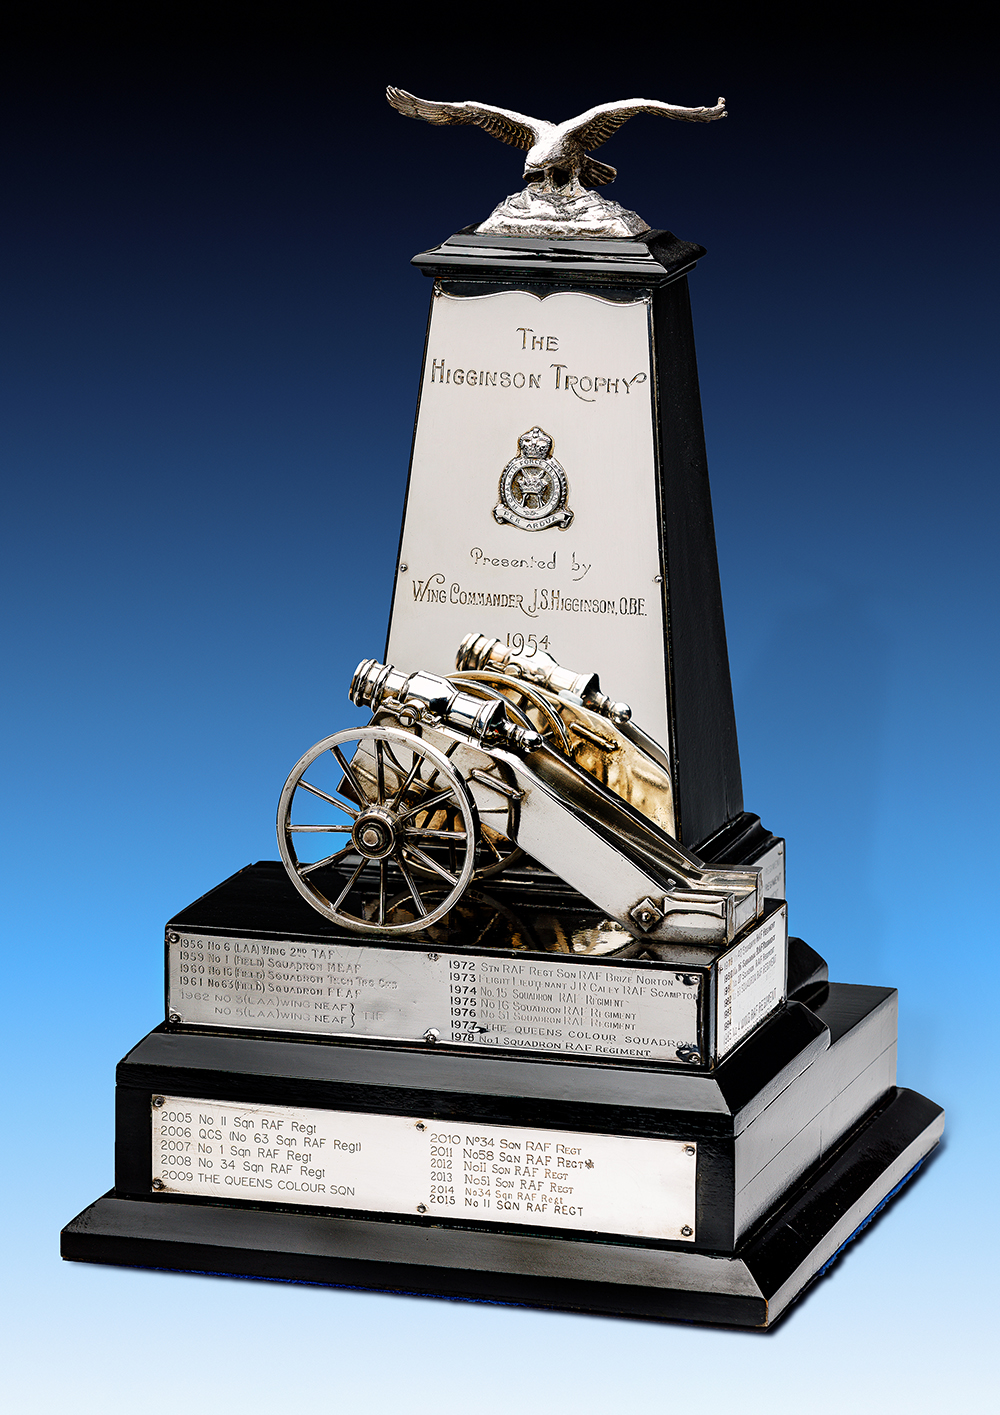 II Squadron are Awarded the Higginson Trophy